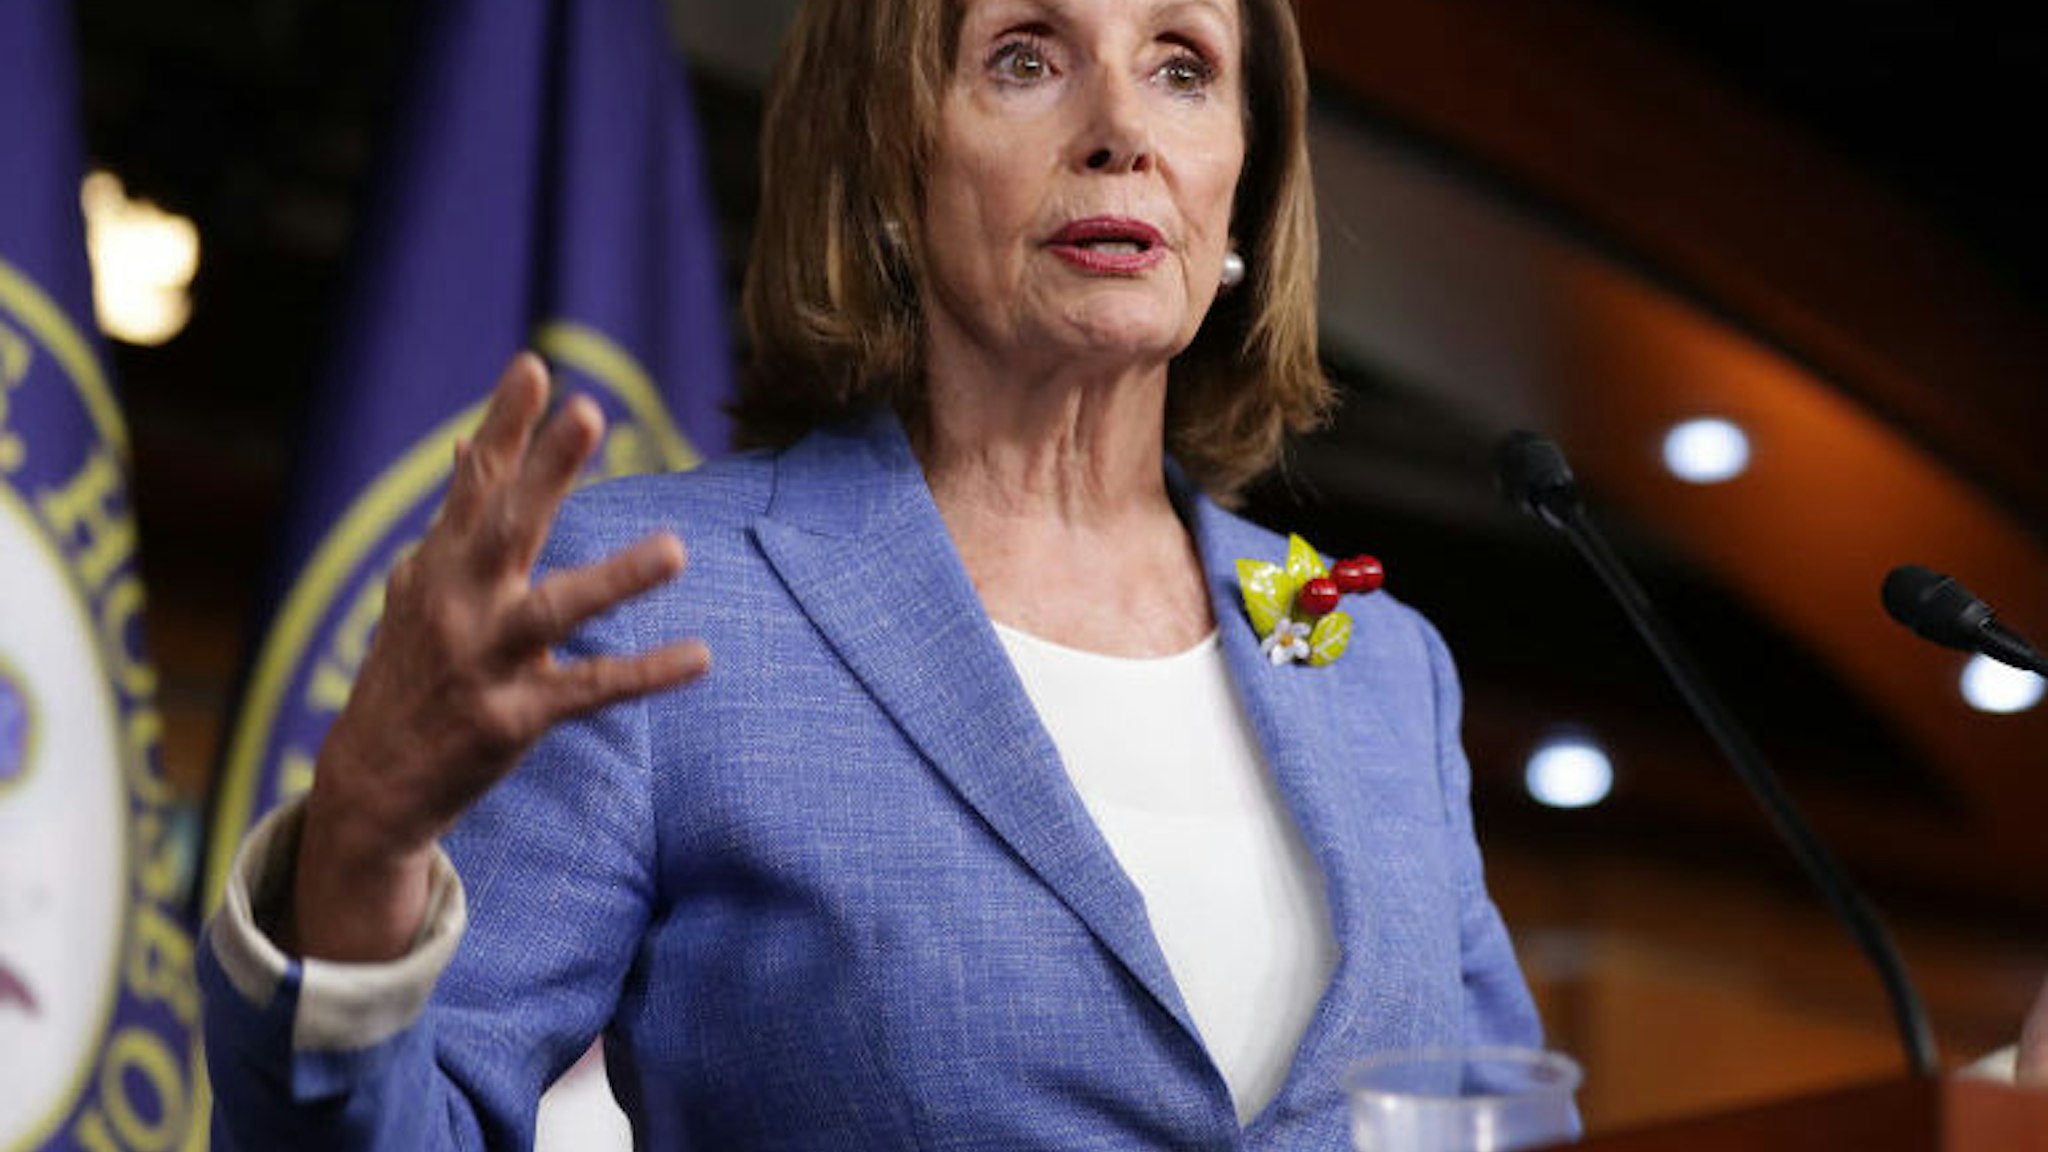 WASHINGTON, DC - JULY 26: Speaker of the House Nancy Pelosi (D-CA) holds her weekly press conference at the U.S. Capitol Visitors Center July 26, 2019 in Washington, DC. The House of Representatives passed a 2-year budget deal Thursday that was struck between Pelosi and Treasury Secretary Steven Mnuchin.